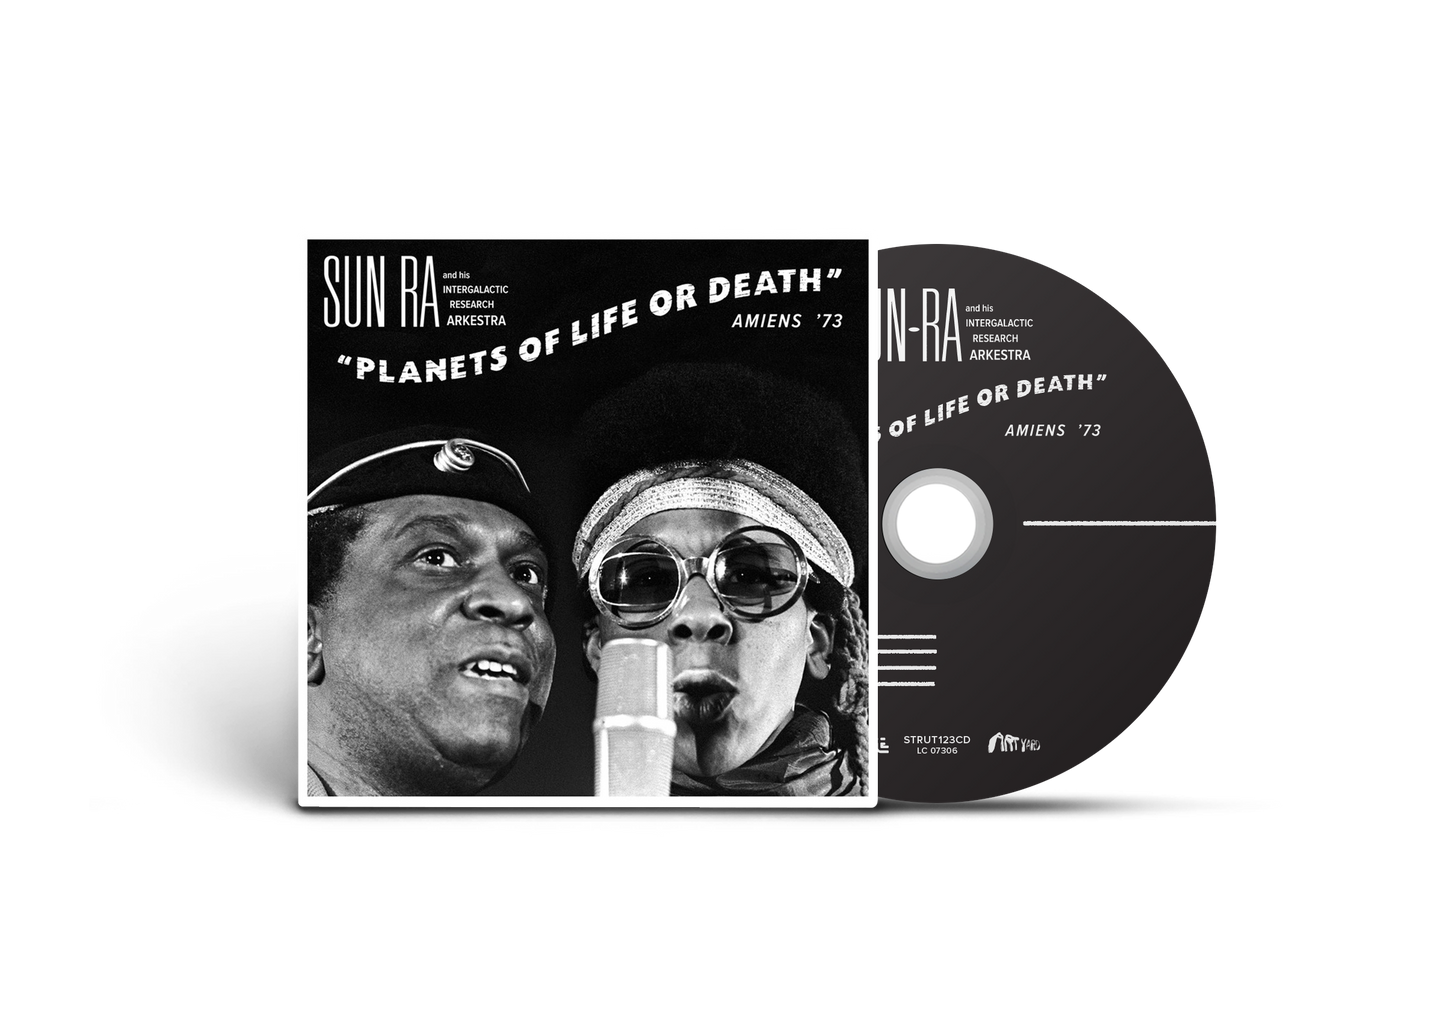 Sun Ra And His Intergalactic Research Arkestra - Planets Of Life Or Death: Amiens ’73